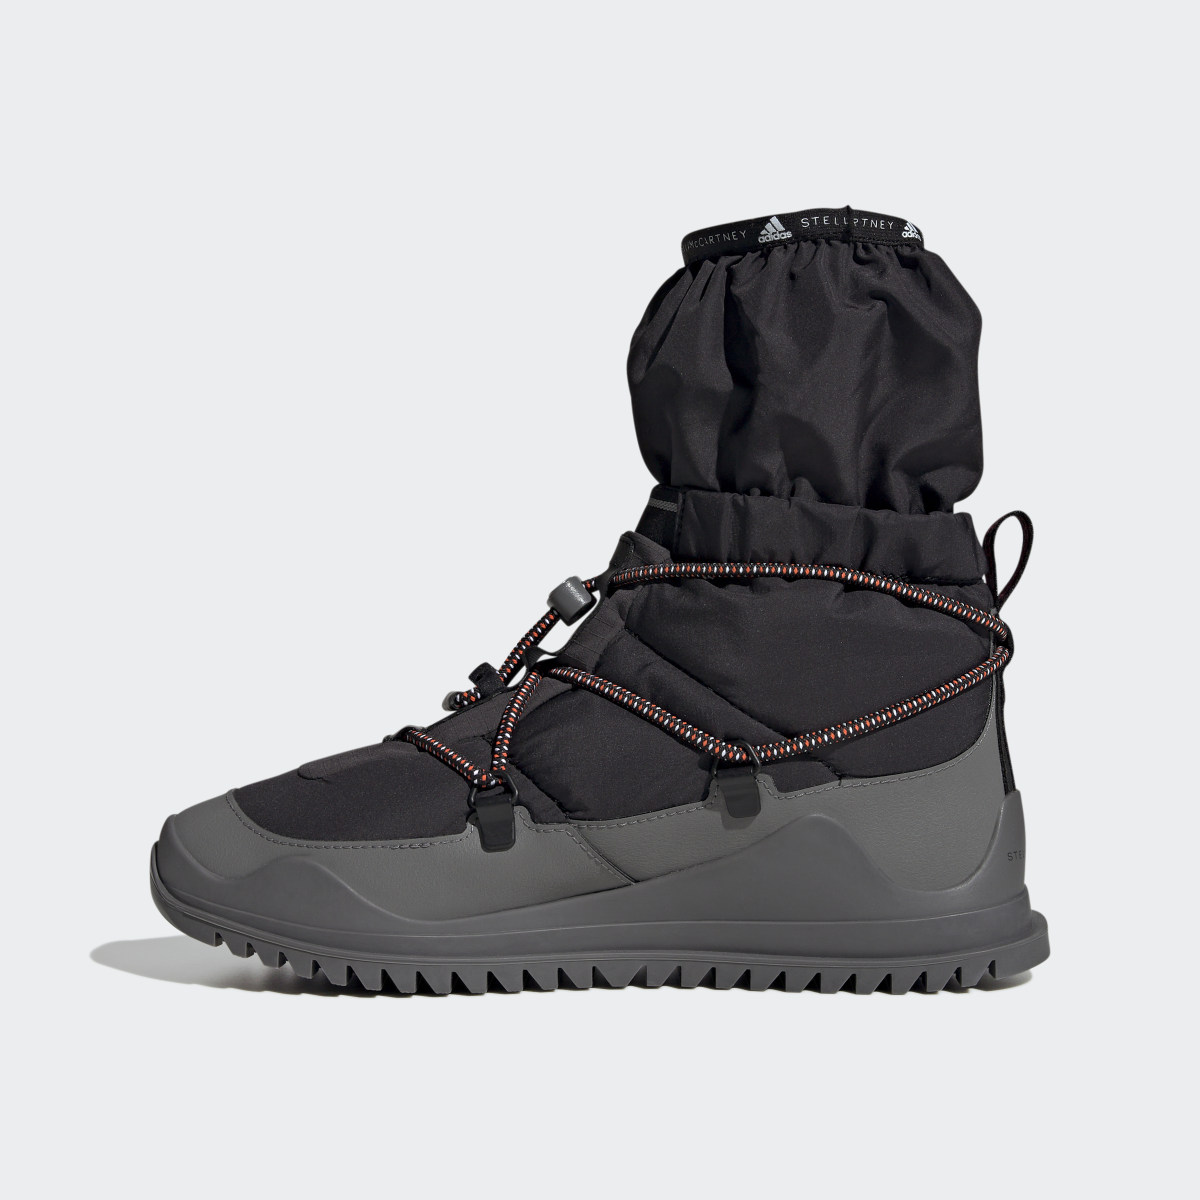 Adidas by Stella McCartney COLD.RDY Winter Boots. 7